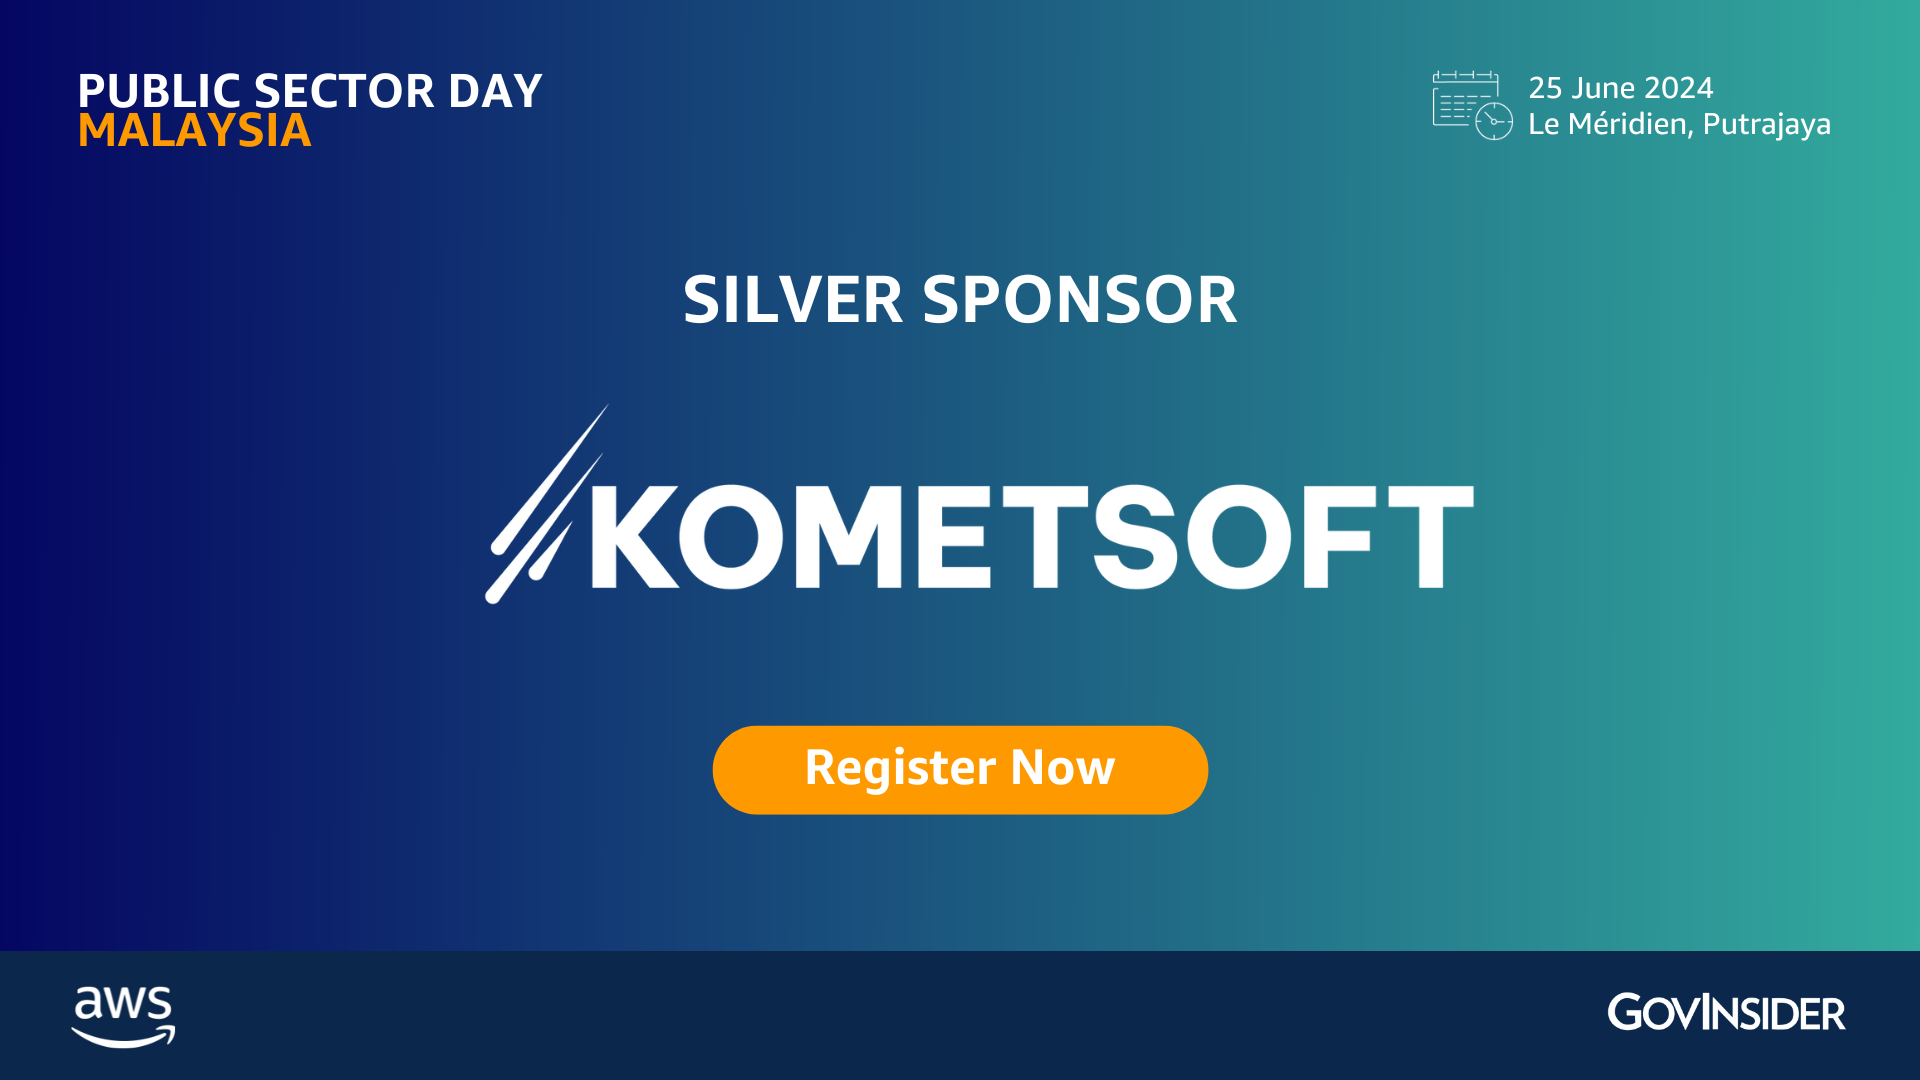 Kometsoft to Participate in Public Sector Day Malaysia 2024